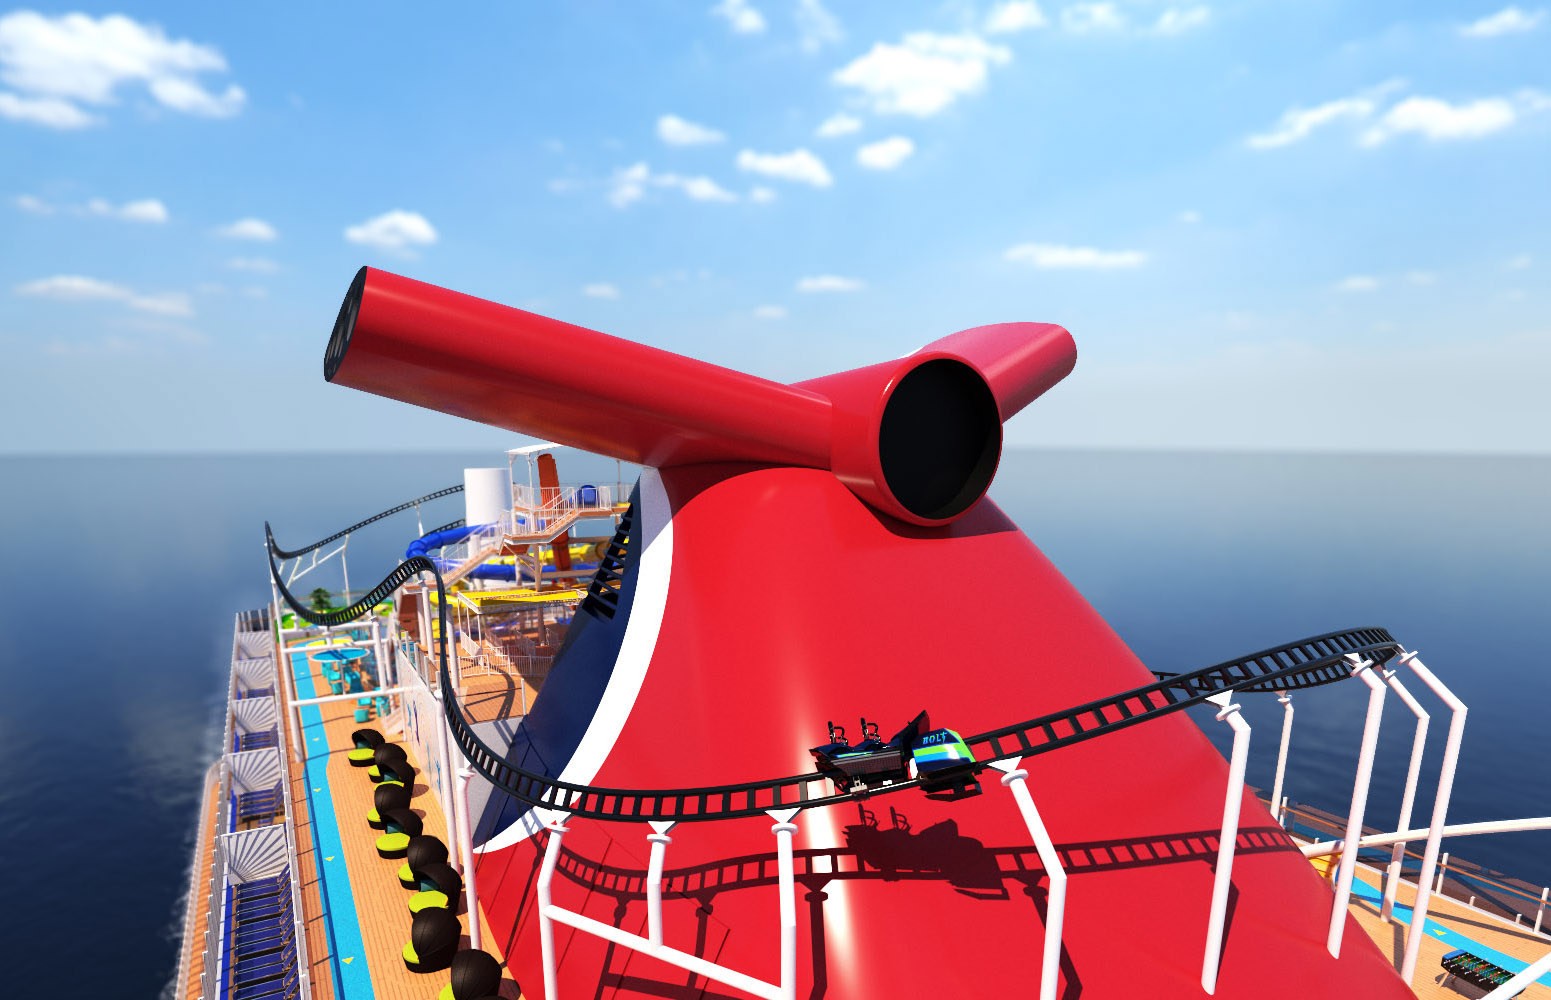 Carnival Cruise Line’s ship Mardi Gras – complete with a 780-foot long roller-coaster ride, suspended nearly 200 feet above the sea – will set sail in 2020. Illustration: Carnival Cruise Line